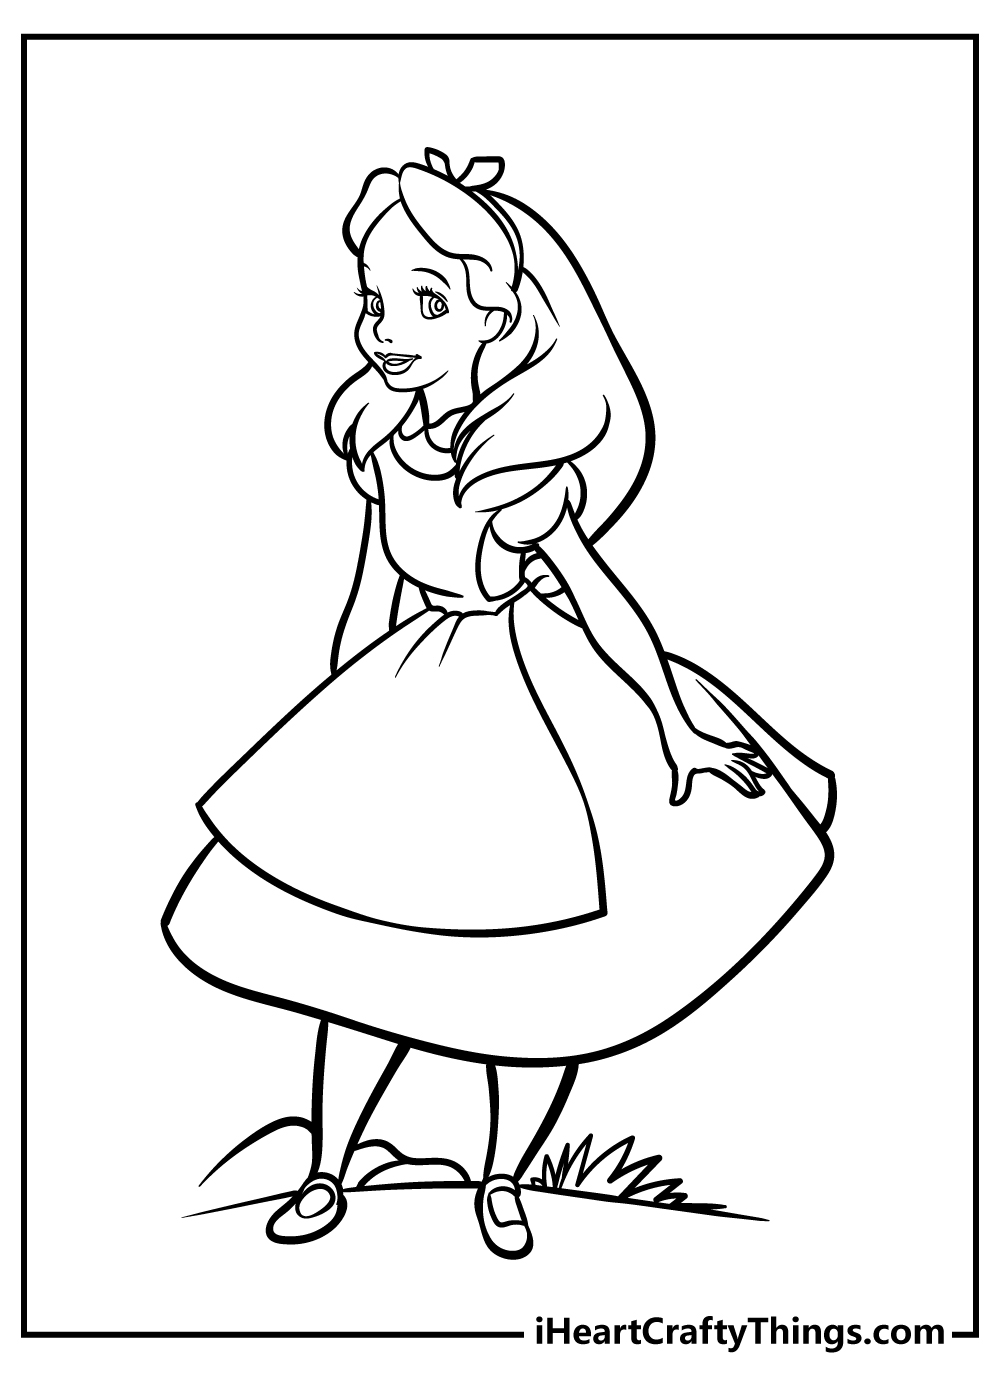 Printable Alice In Wonderland Coloring Pages Updated 20